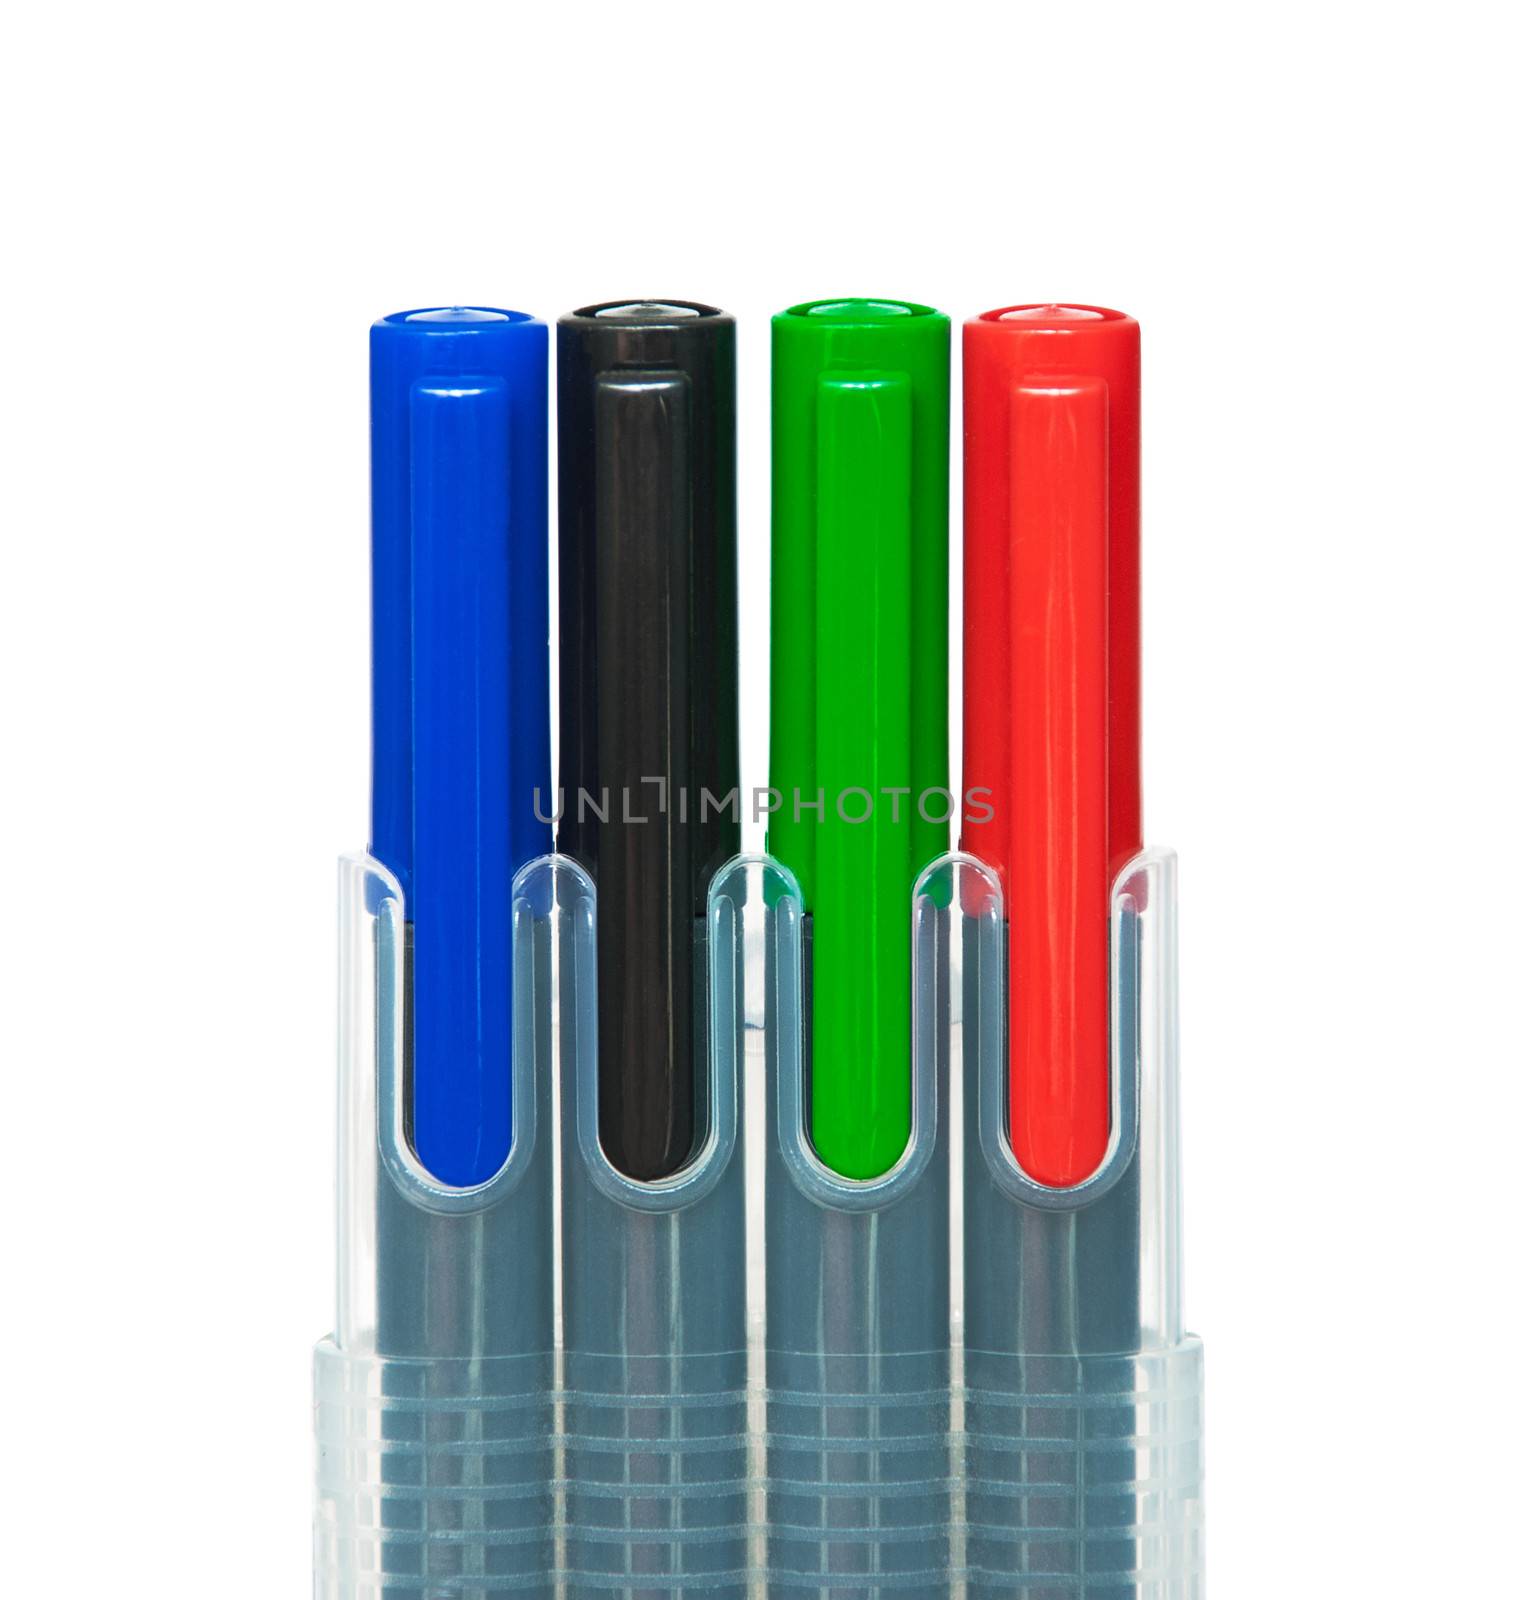 Colored pencils red, green, blue and black isolated on white background.